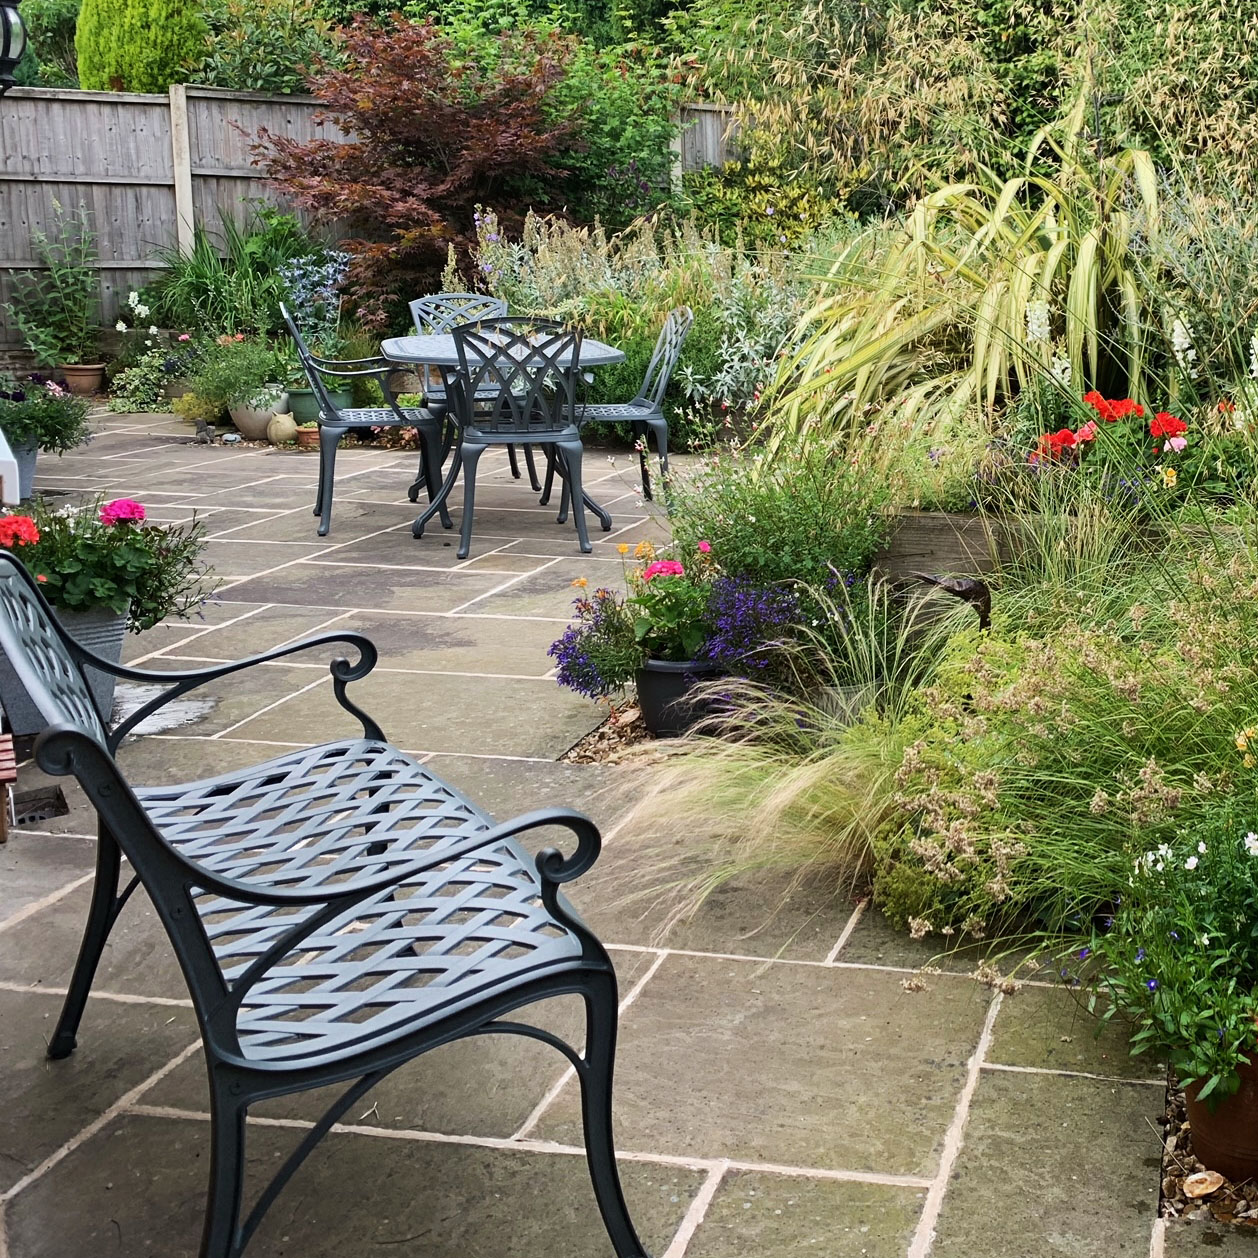 Our Jasmine Bench and June Garden Table set don't overpower this space but draw you into the garden